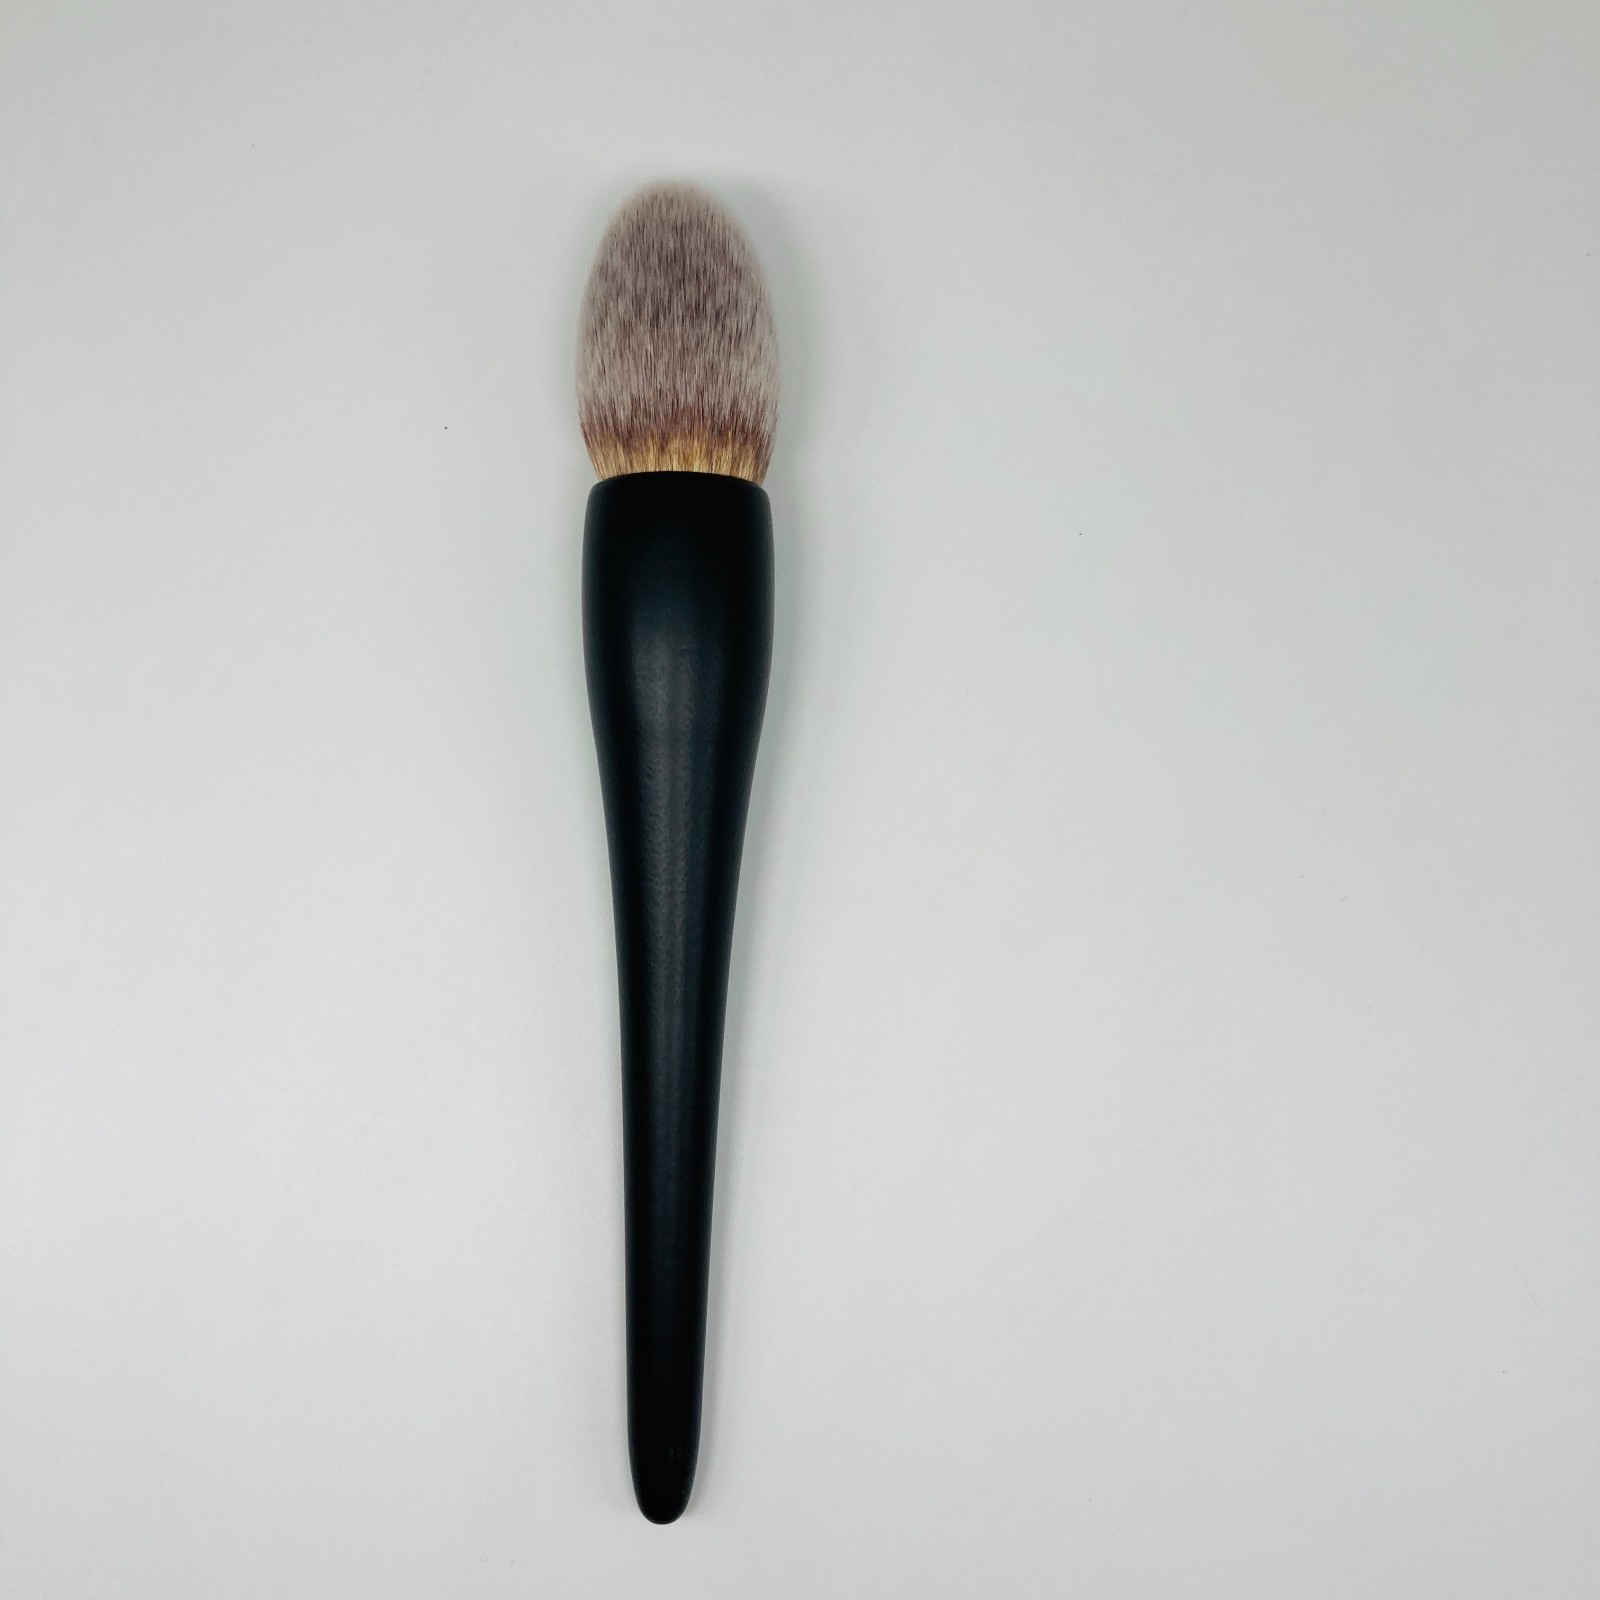 Suprabeauty cheap face makeup brushes manufacturer for sale-1